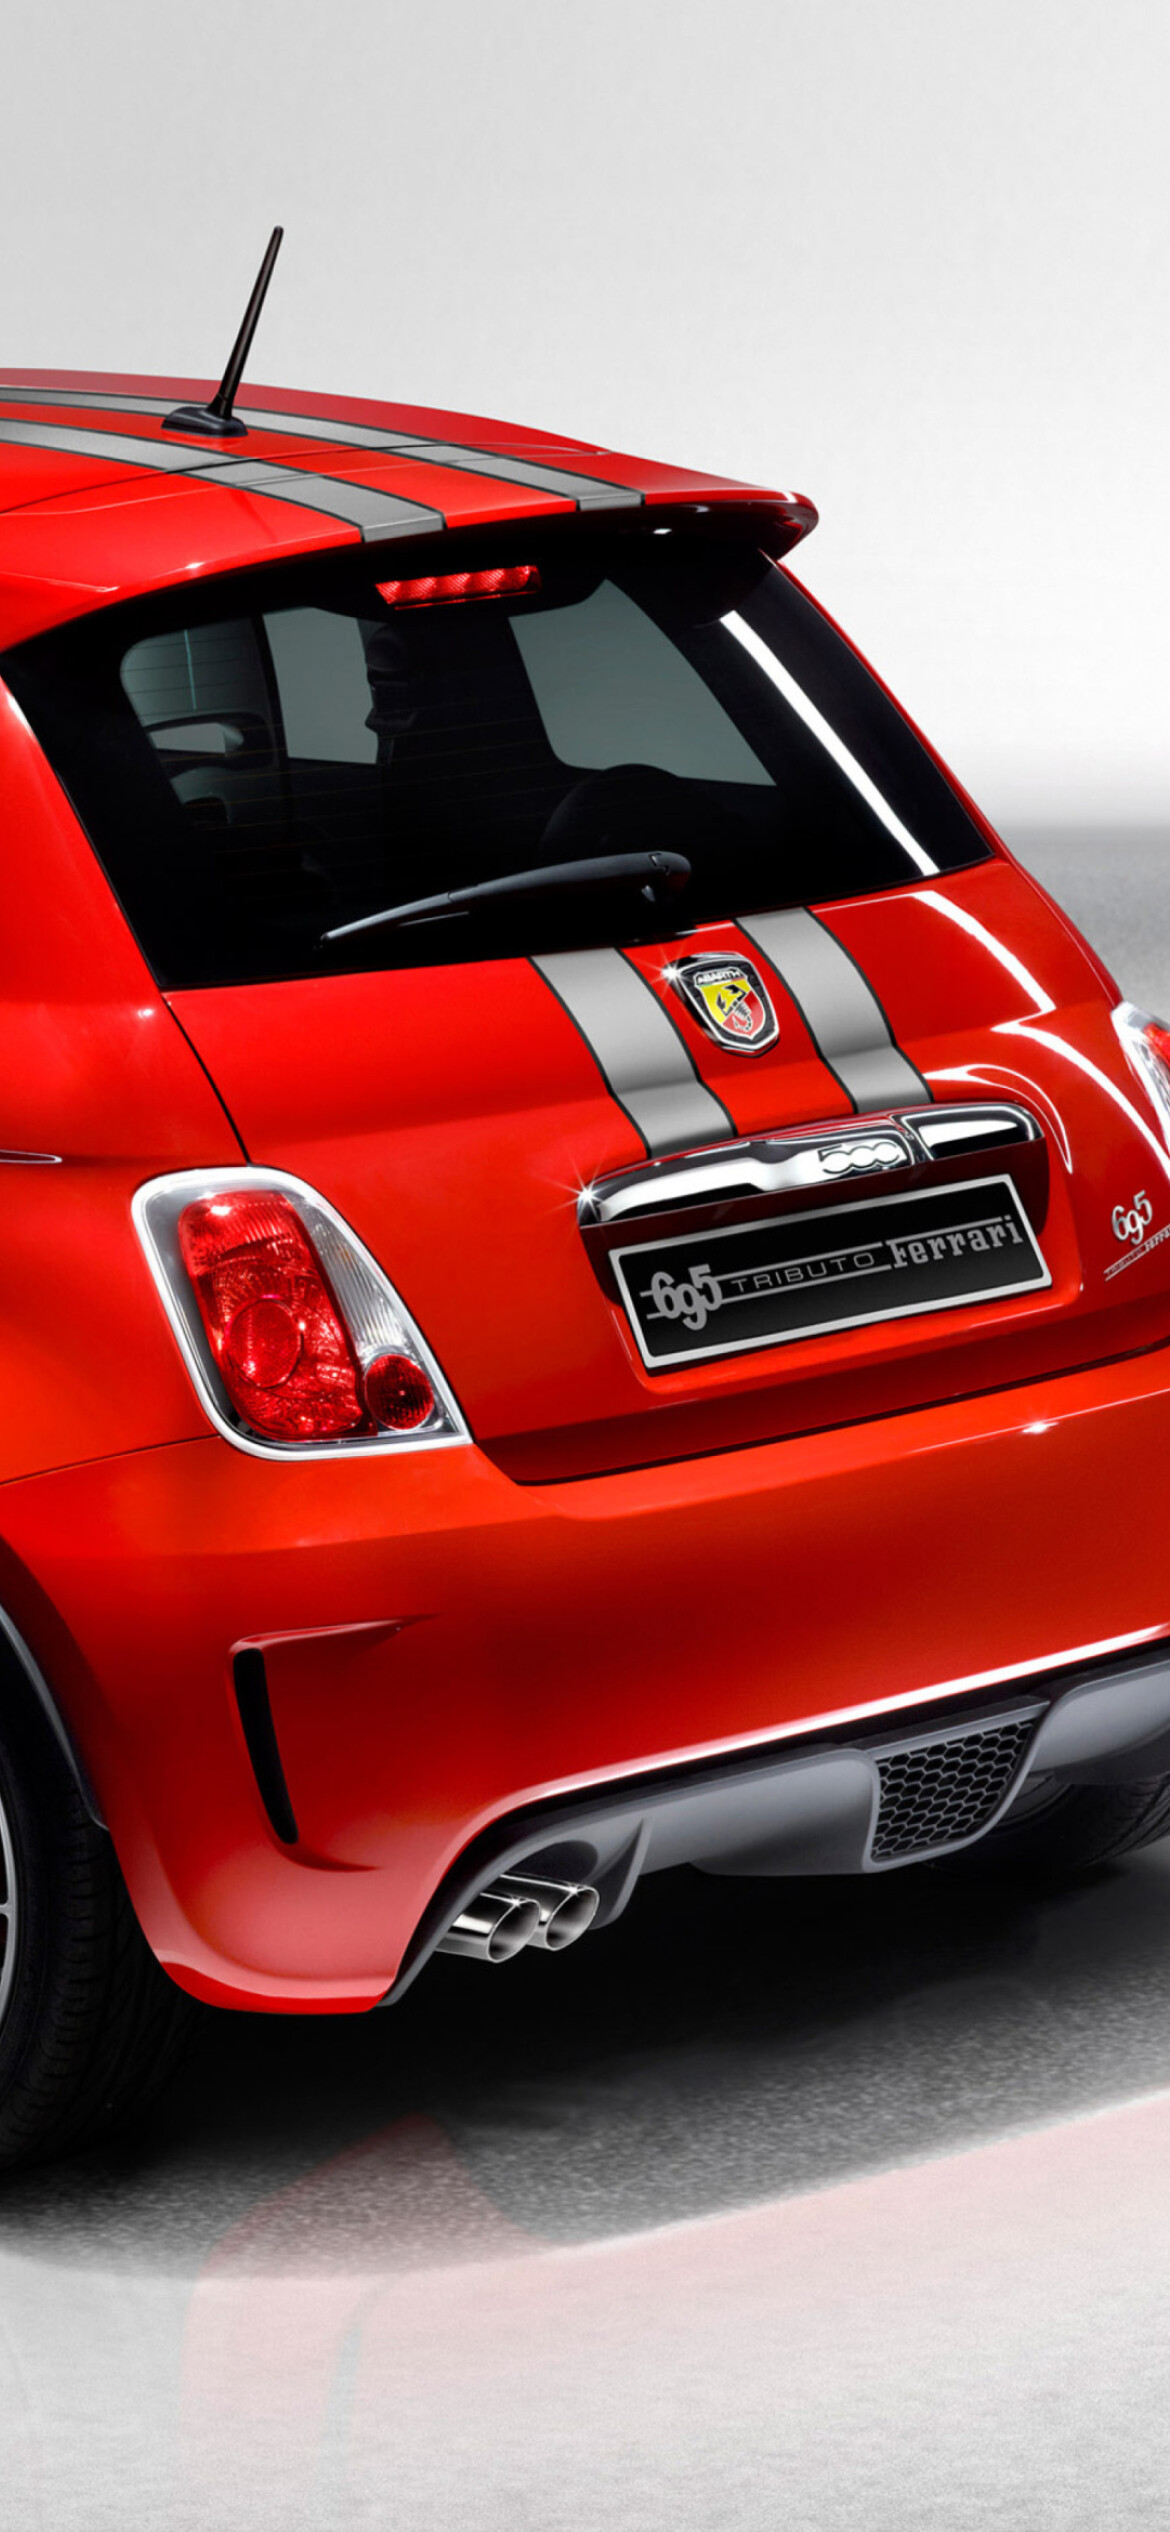 Fiat: Fiat-brand cars are built in several locations around the world, Outside Italy, the largest country of production is Brazil, where the brand was for many years the market leader. 1170x2540 HD Wallpaper.